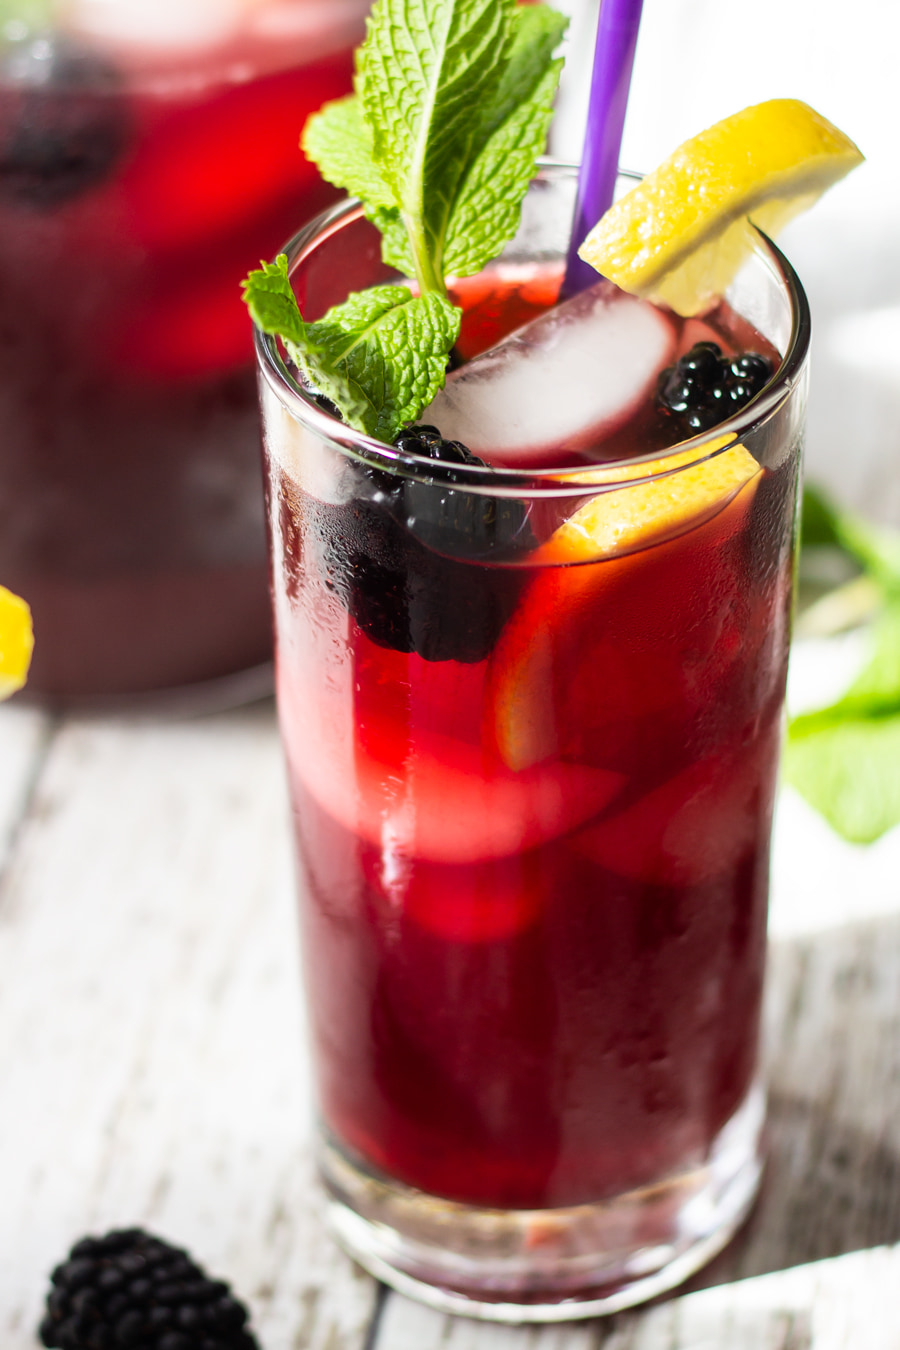 blackberry iced tea with whole blackberries in glass